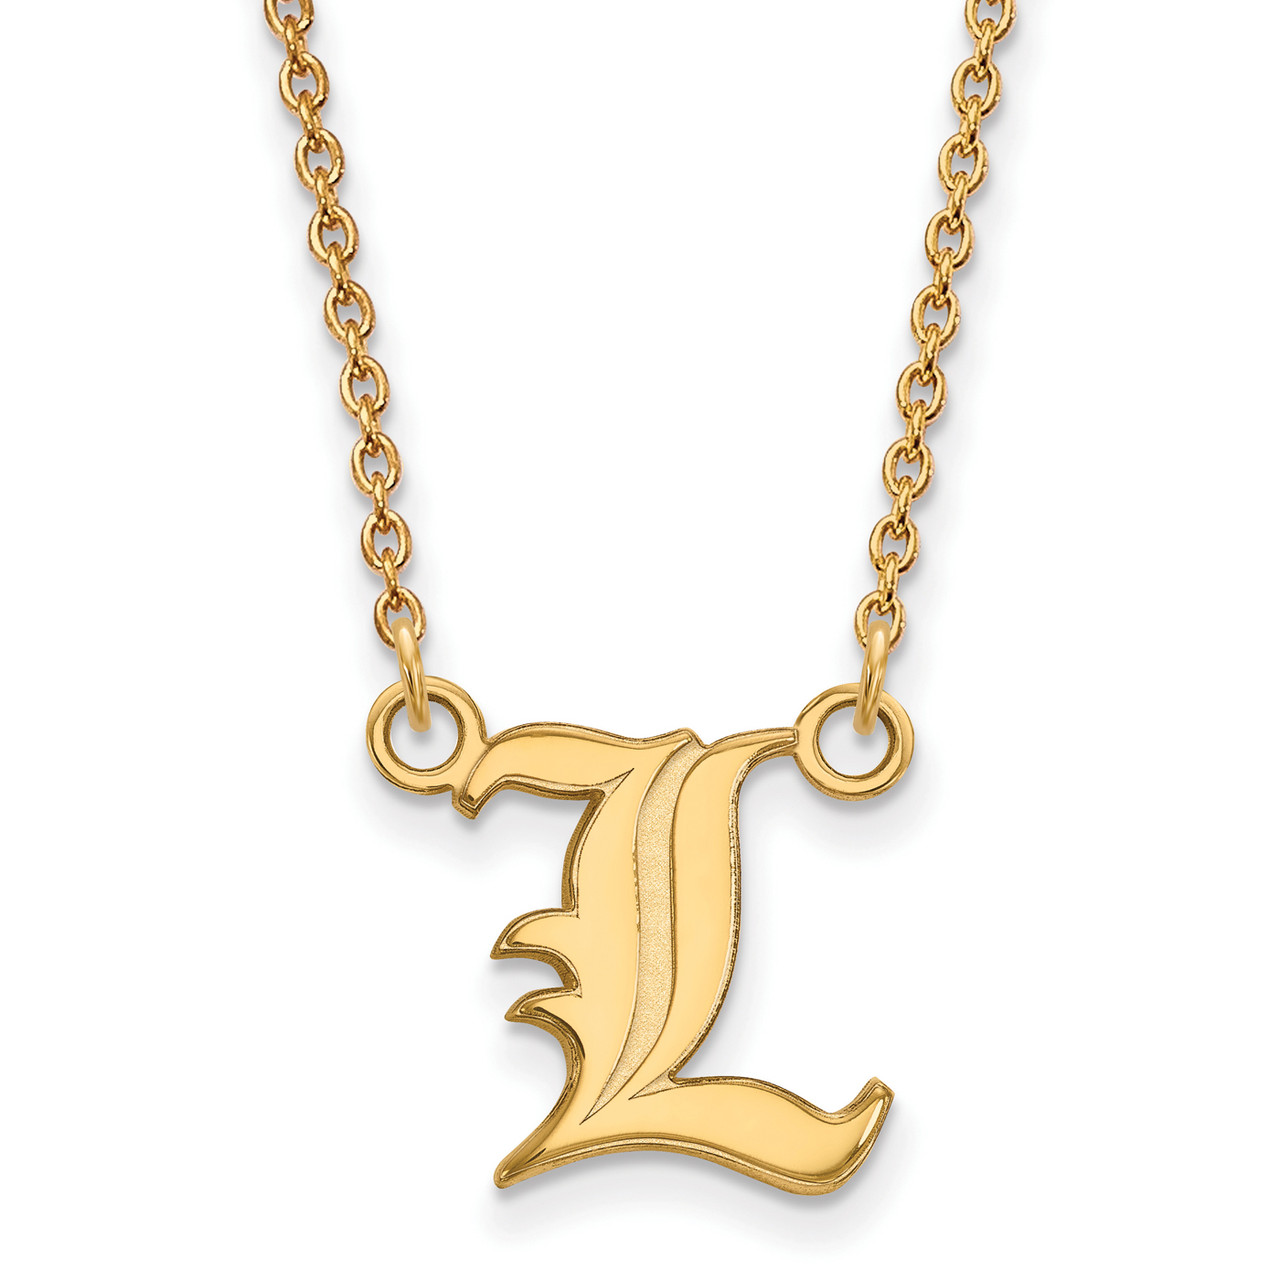 Louisville Cardinals Chain Necklace - Sports Unlimited